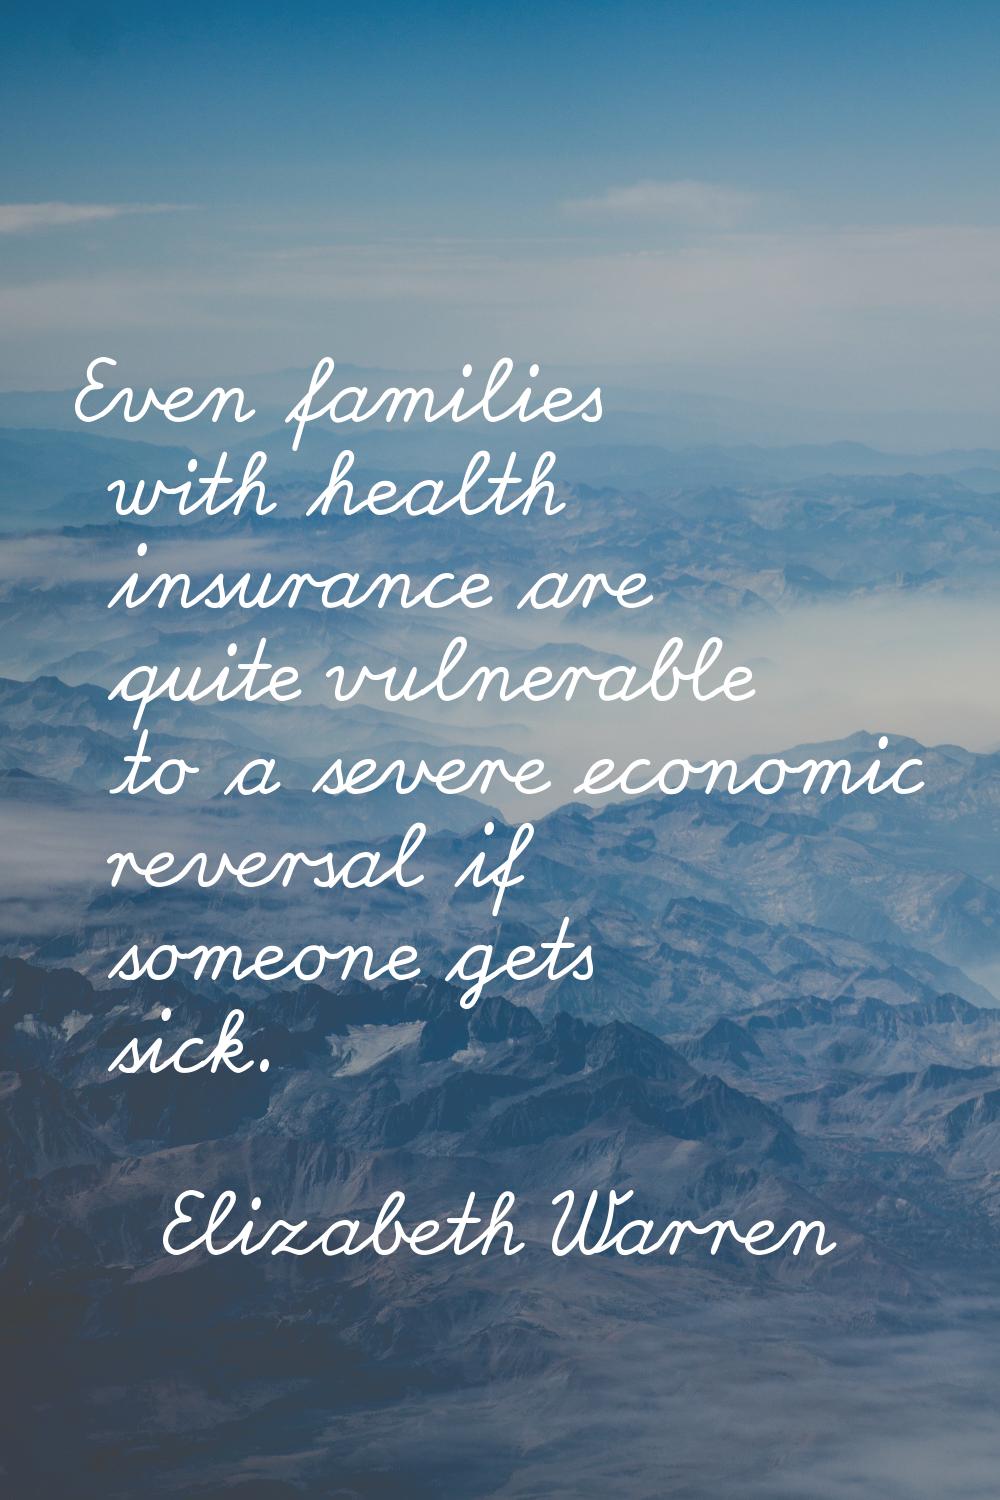 Even families with health insurance are quite vulnerable to a severe economic reversal if someone g